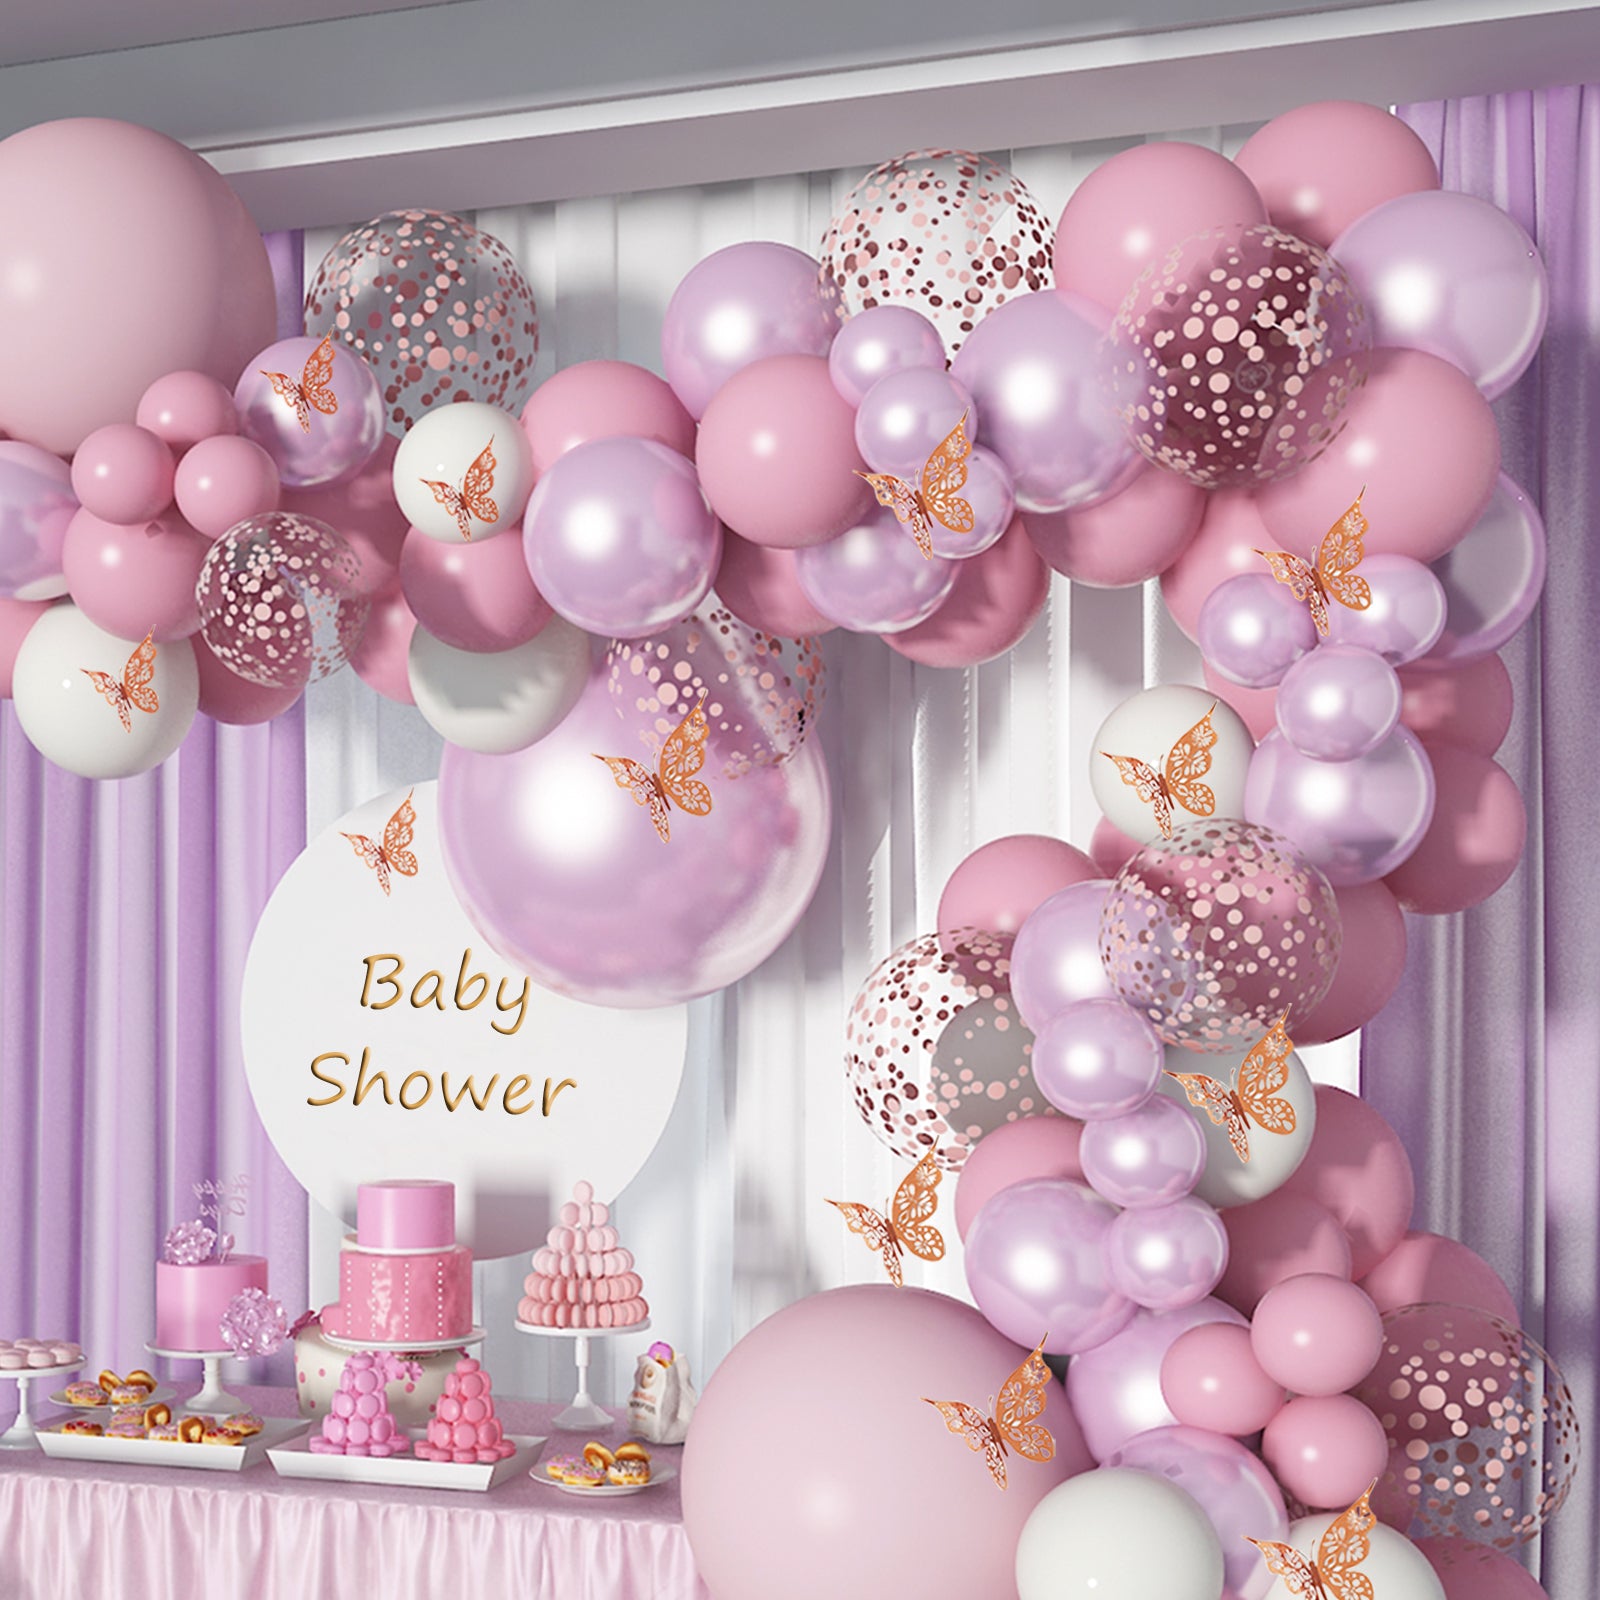 Soonlyn Baby Shower Decorations for Girl 140 Pcs Pink Balloon Garland –  Soonlyn Party